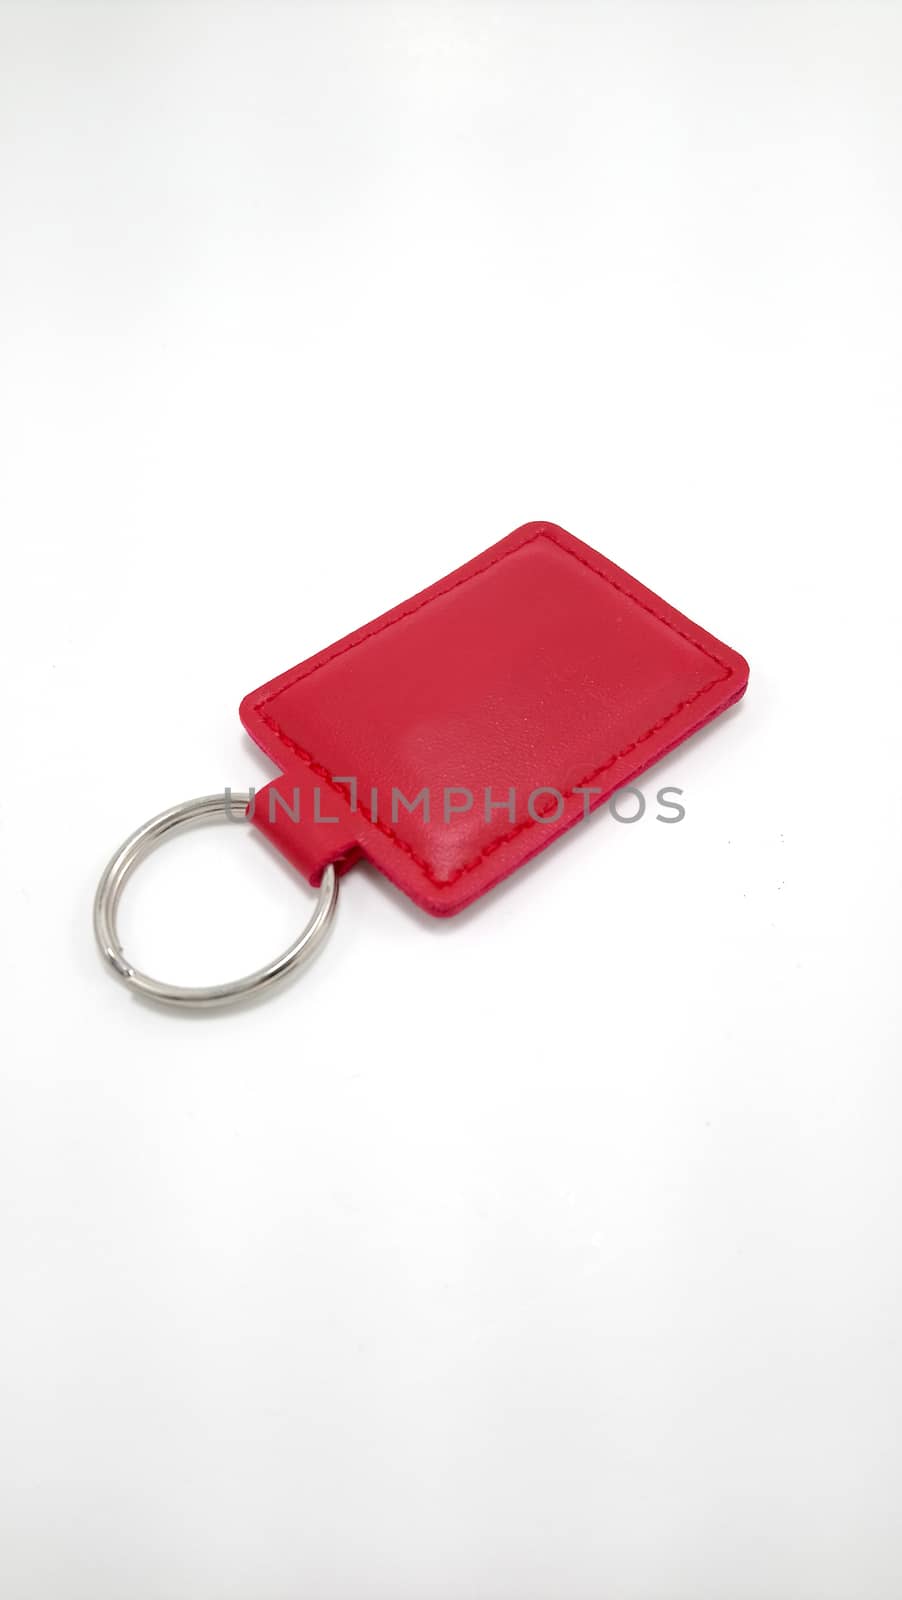 Red leather small portable fit in your pocket keychain